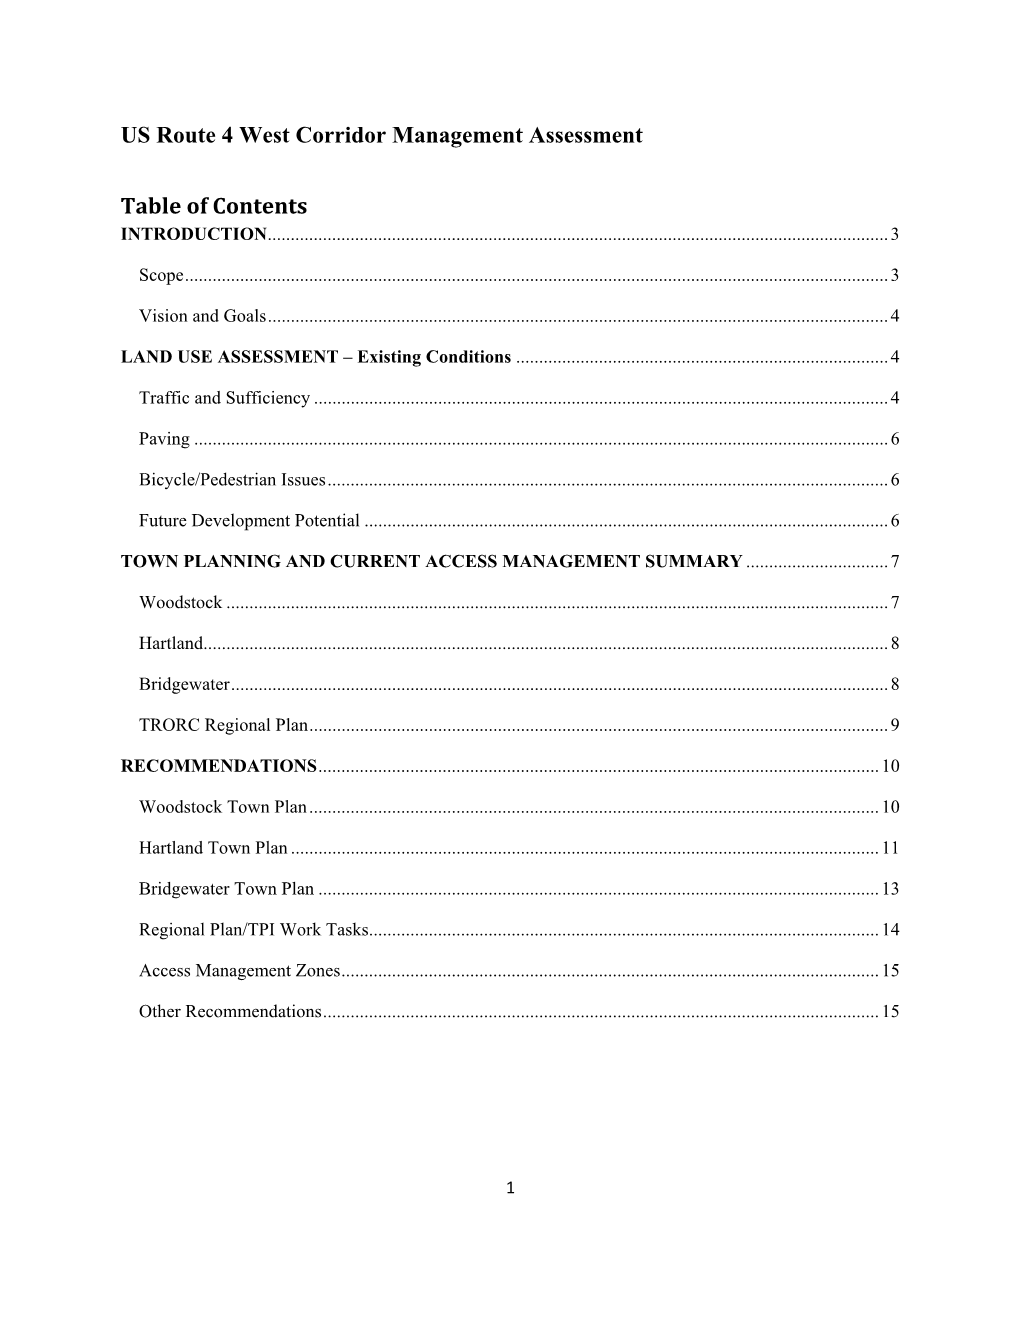 US Route 4 West Corridor Management Assessment Table of Contents